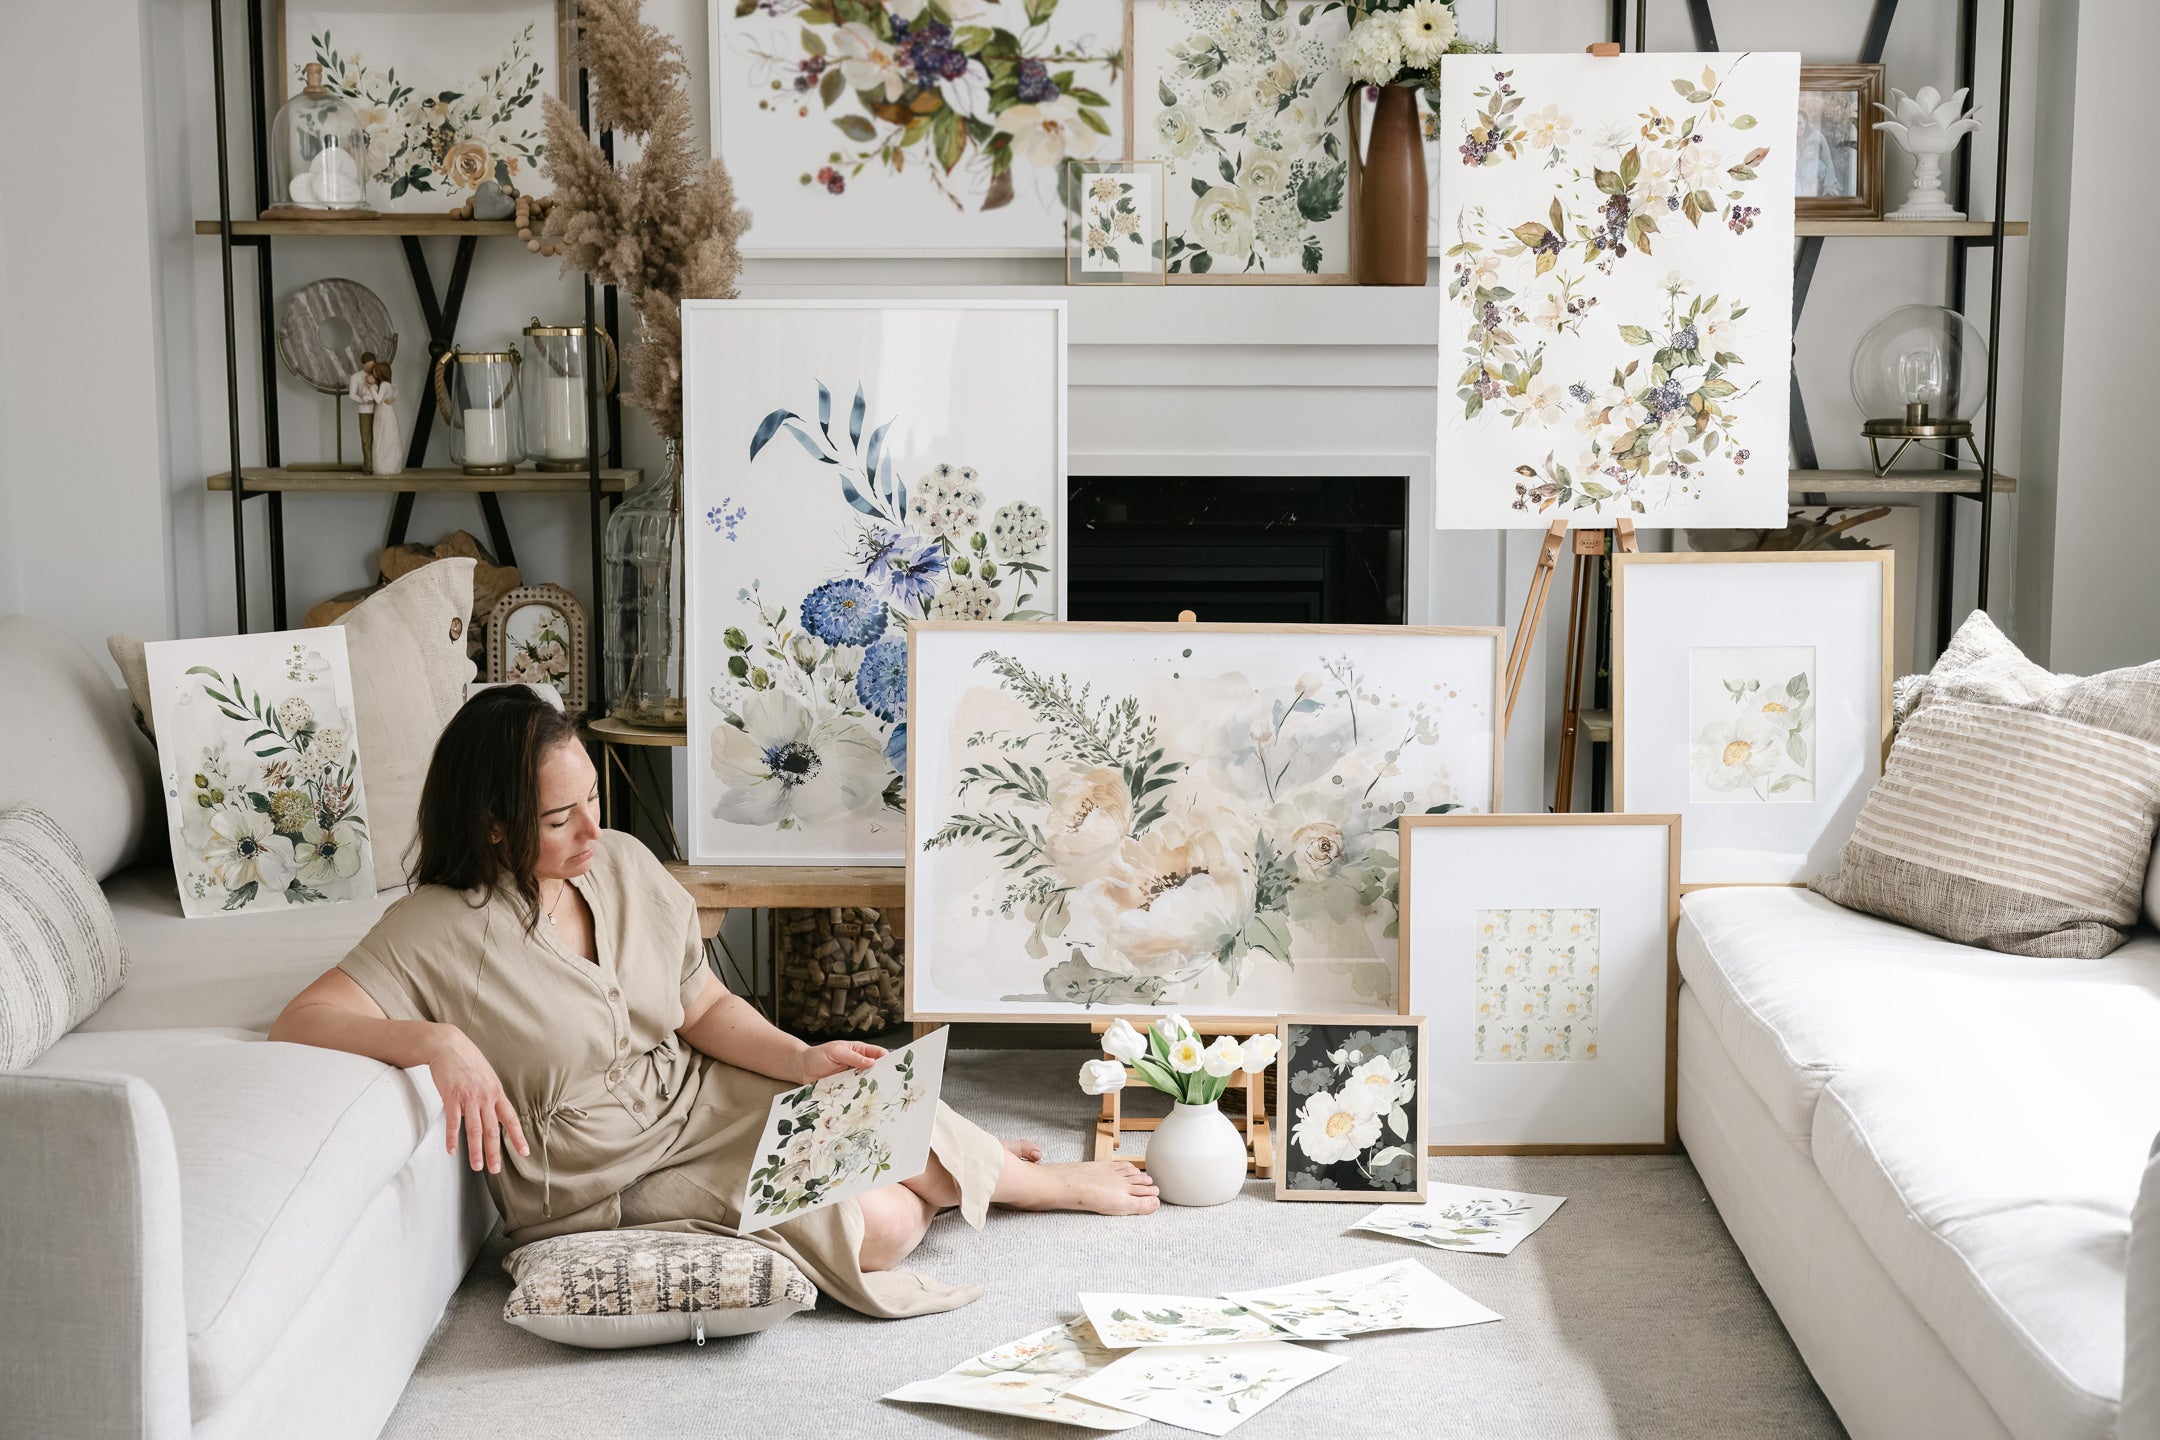 Artist surrounded by beautiful floral art work